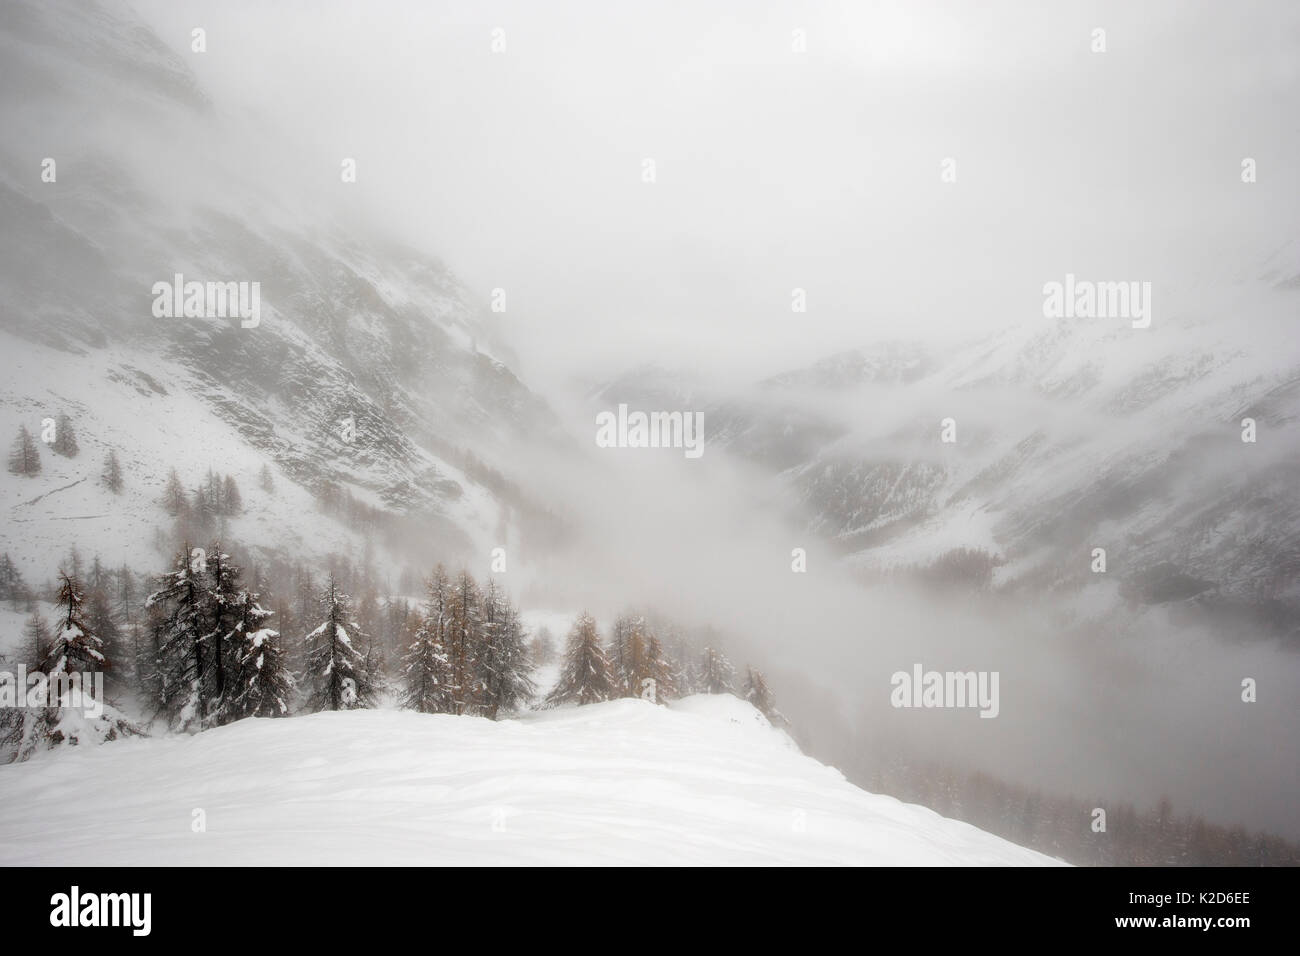 Winter landscape with steep mountain sides covered in snow on a misty day. Gran Paradiso National Park, Italy, November 2014. Stock Photo